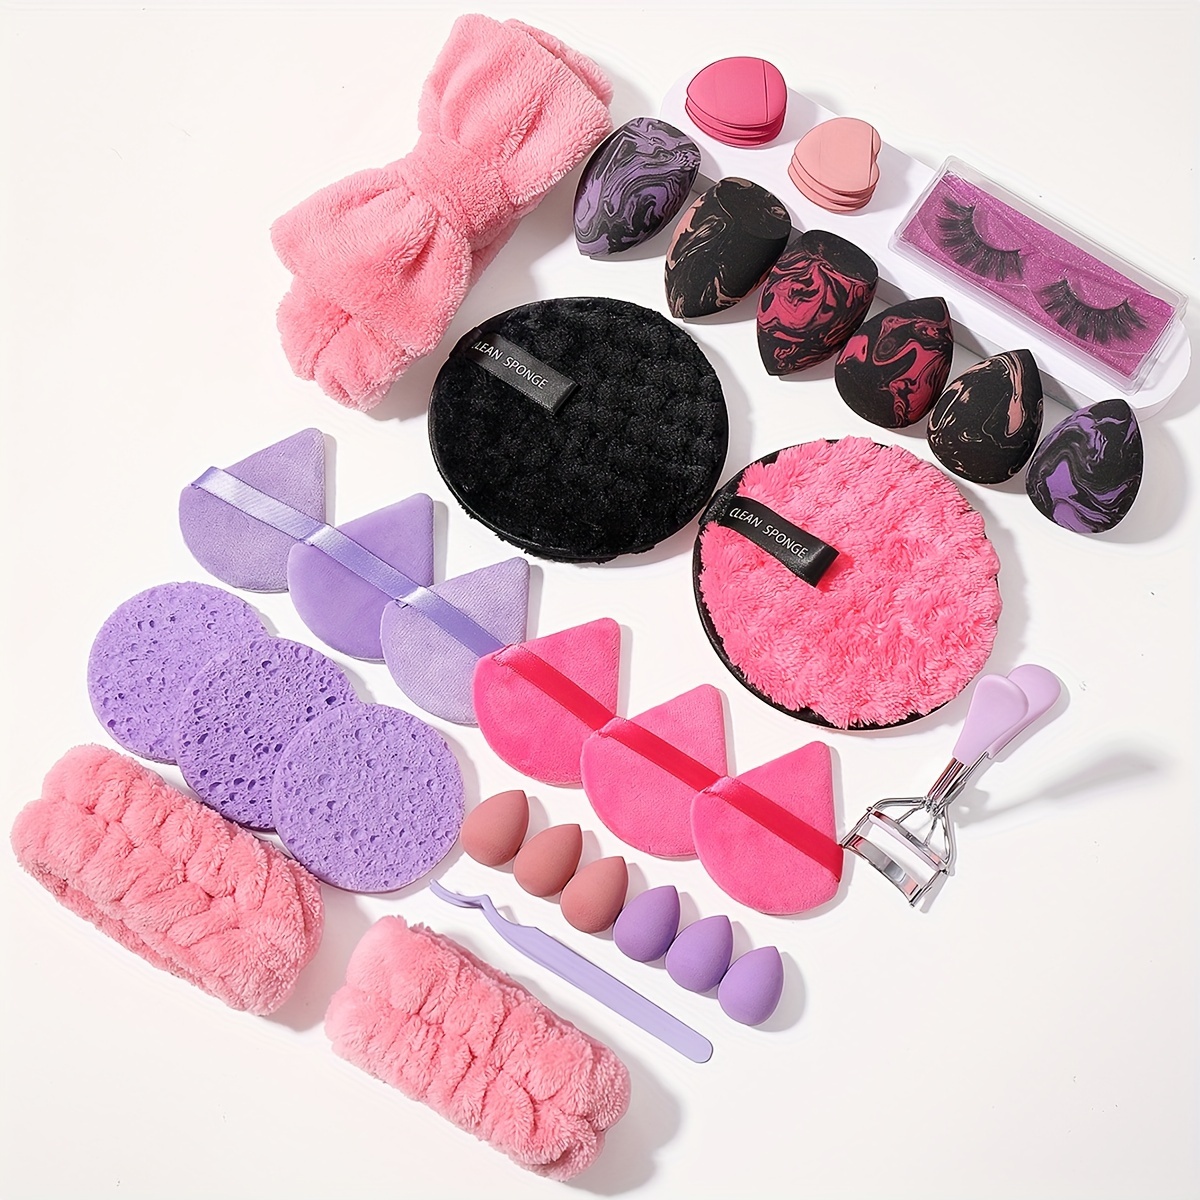 

35pcs All-in-one Makeup Set: Accessories For Application & Removal. Face Wash Headband And Wristband, Powder Puffs, Sponges And Beauty Blenders, Eyelash Curler, False Eyelash, Cleaning Tools